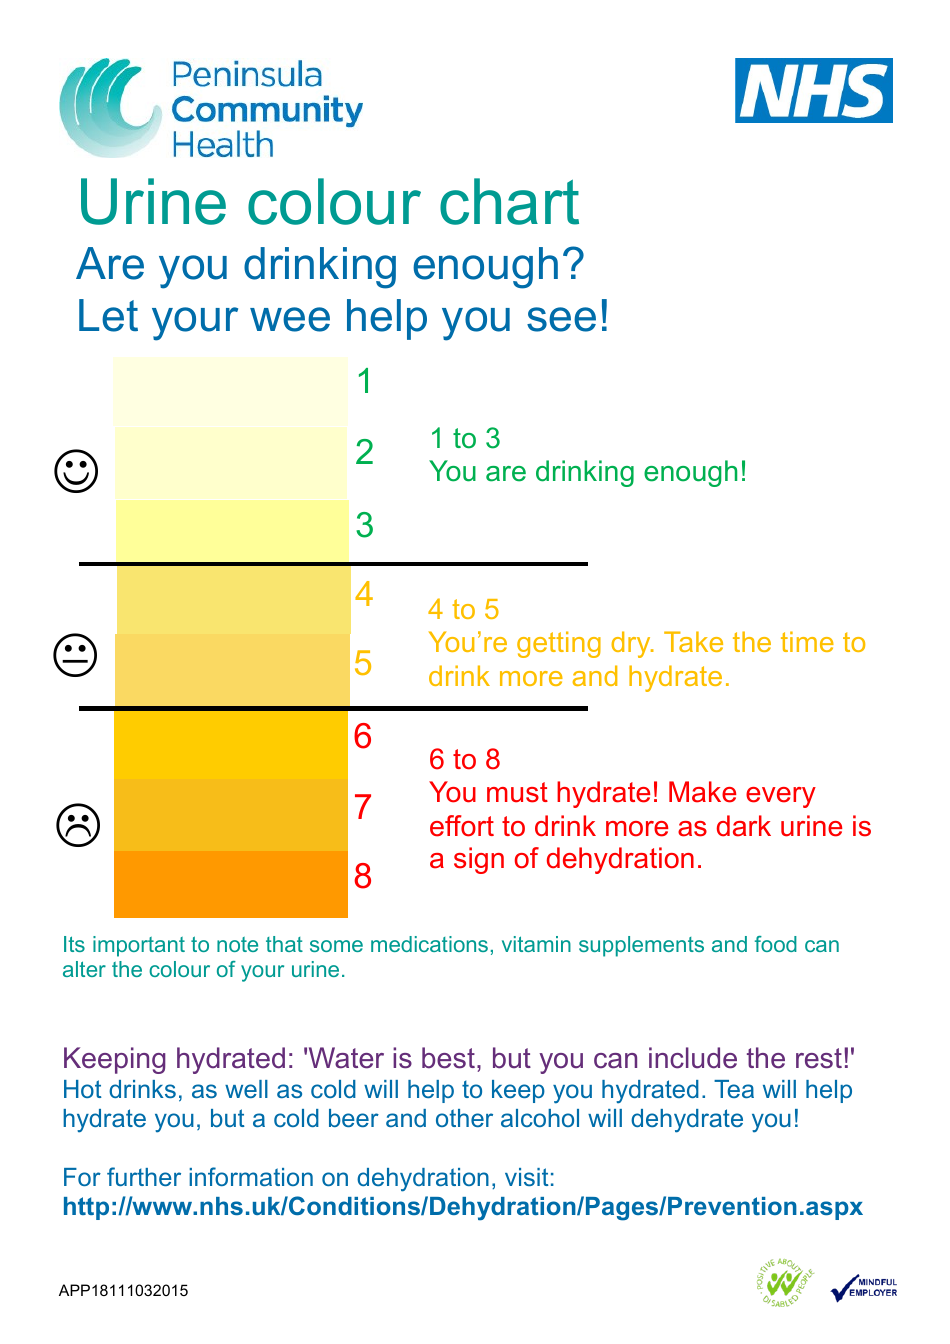 Urine Color Chart - Calculate Your Health with Peninsula Community Health